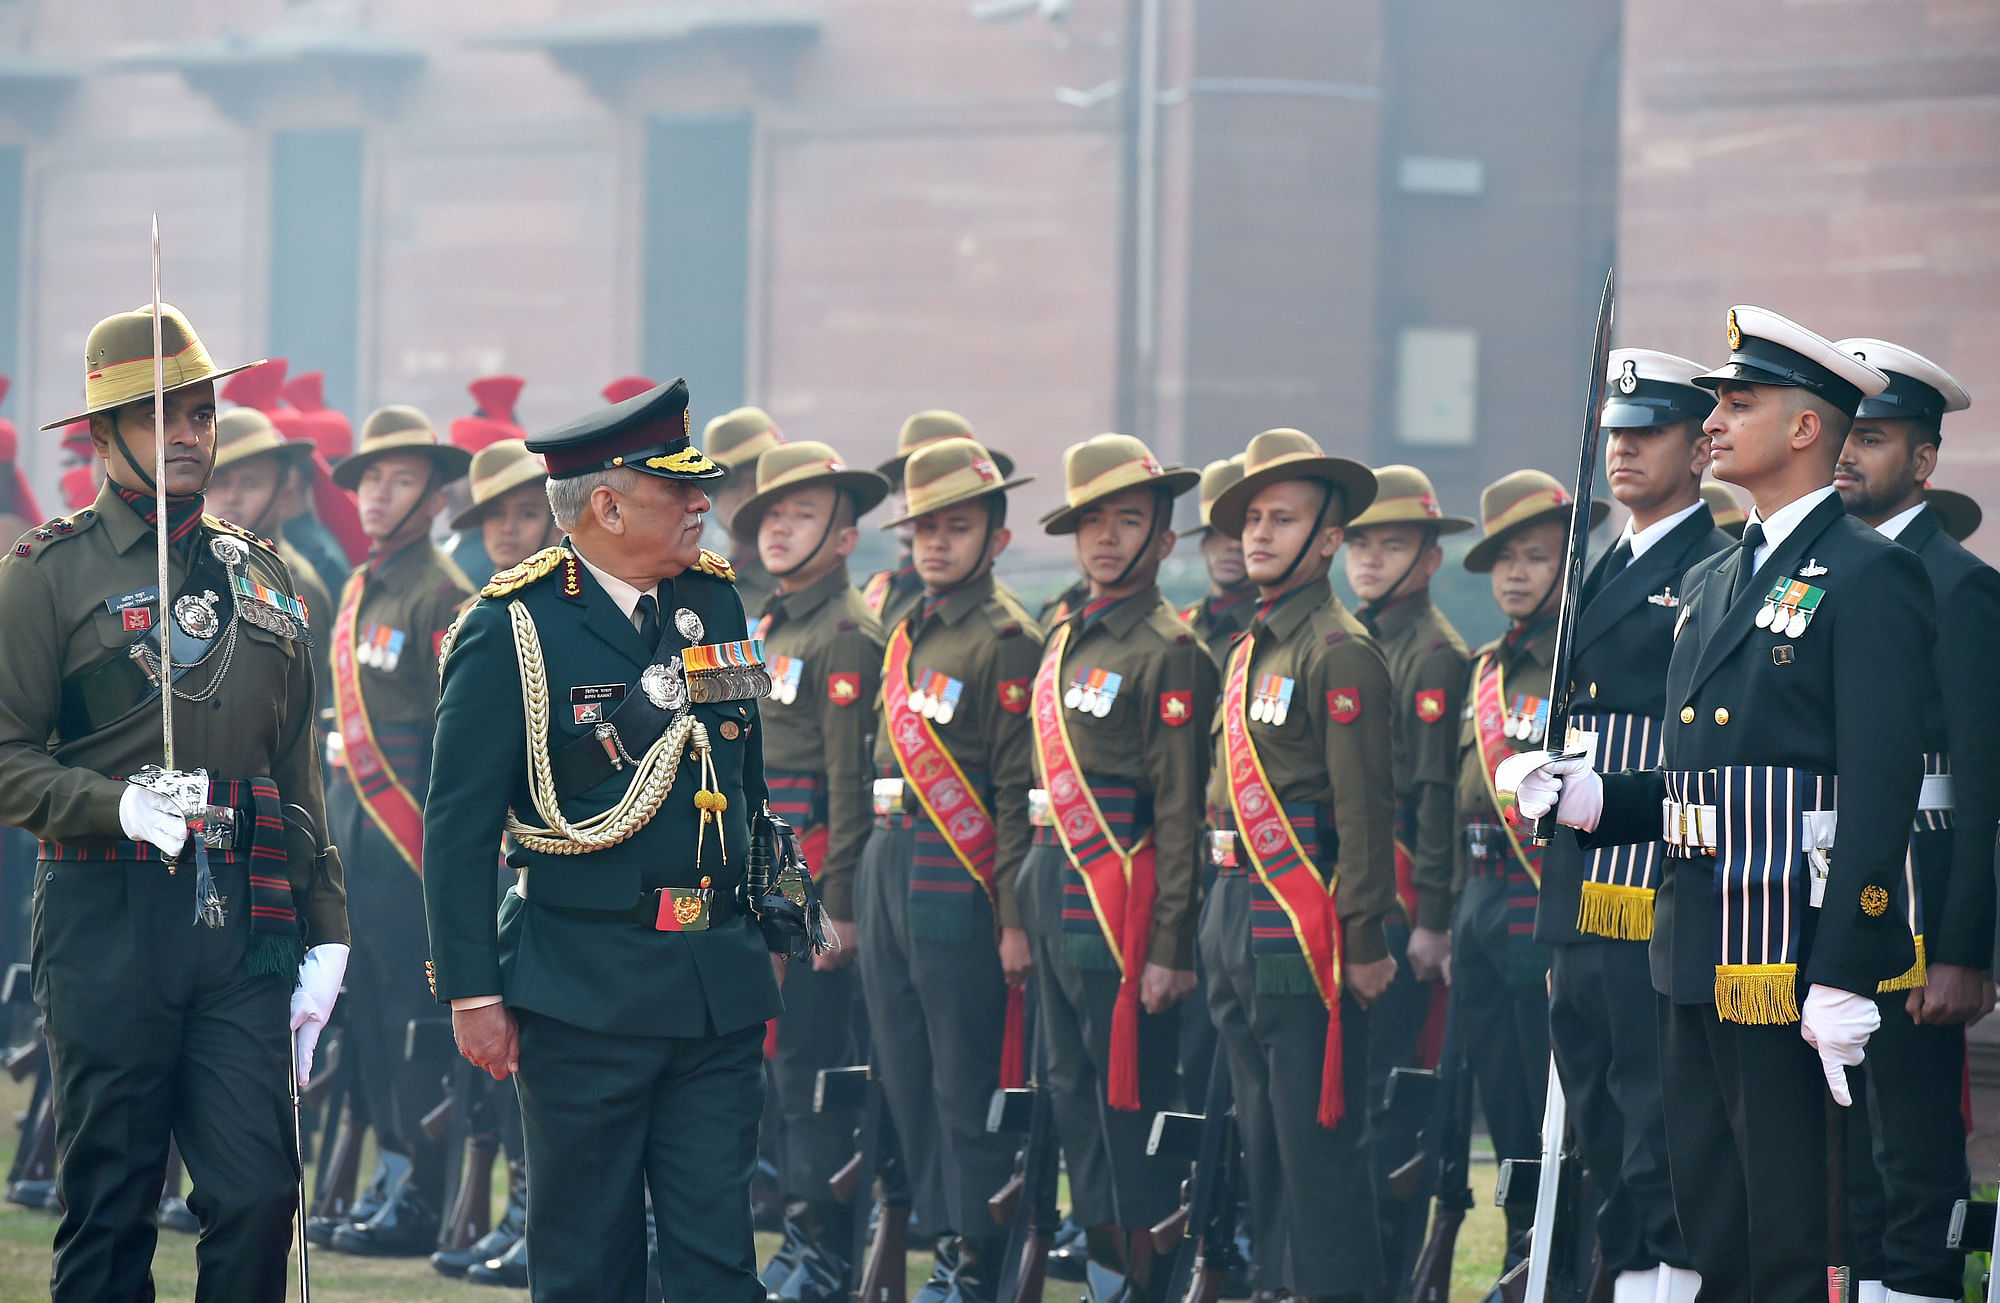  Indias first Chief of Defence Staff (CDS) Gen Bipin Rawat inspects the Guard of Honour at South Block lawns in New Delhi.